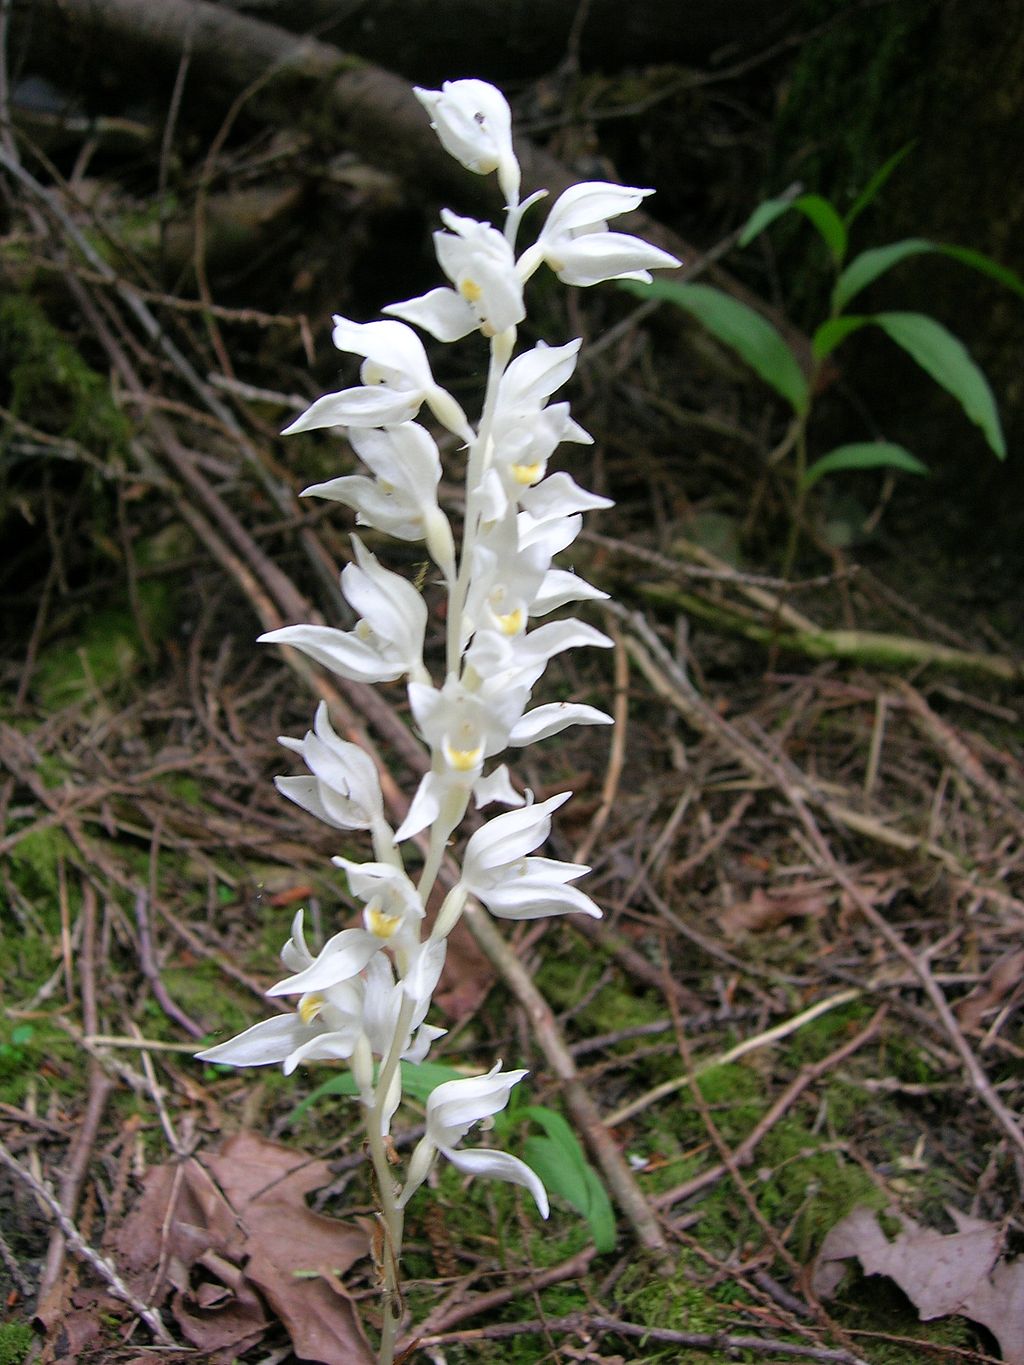 A photo of a phantom orchid